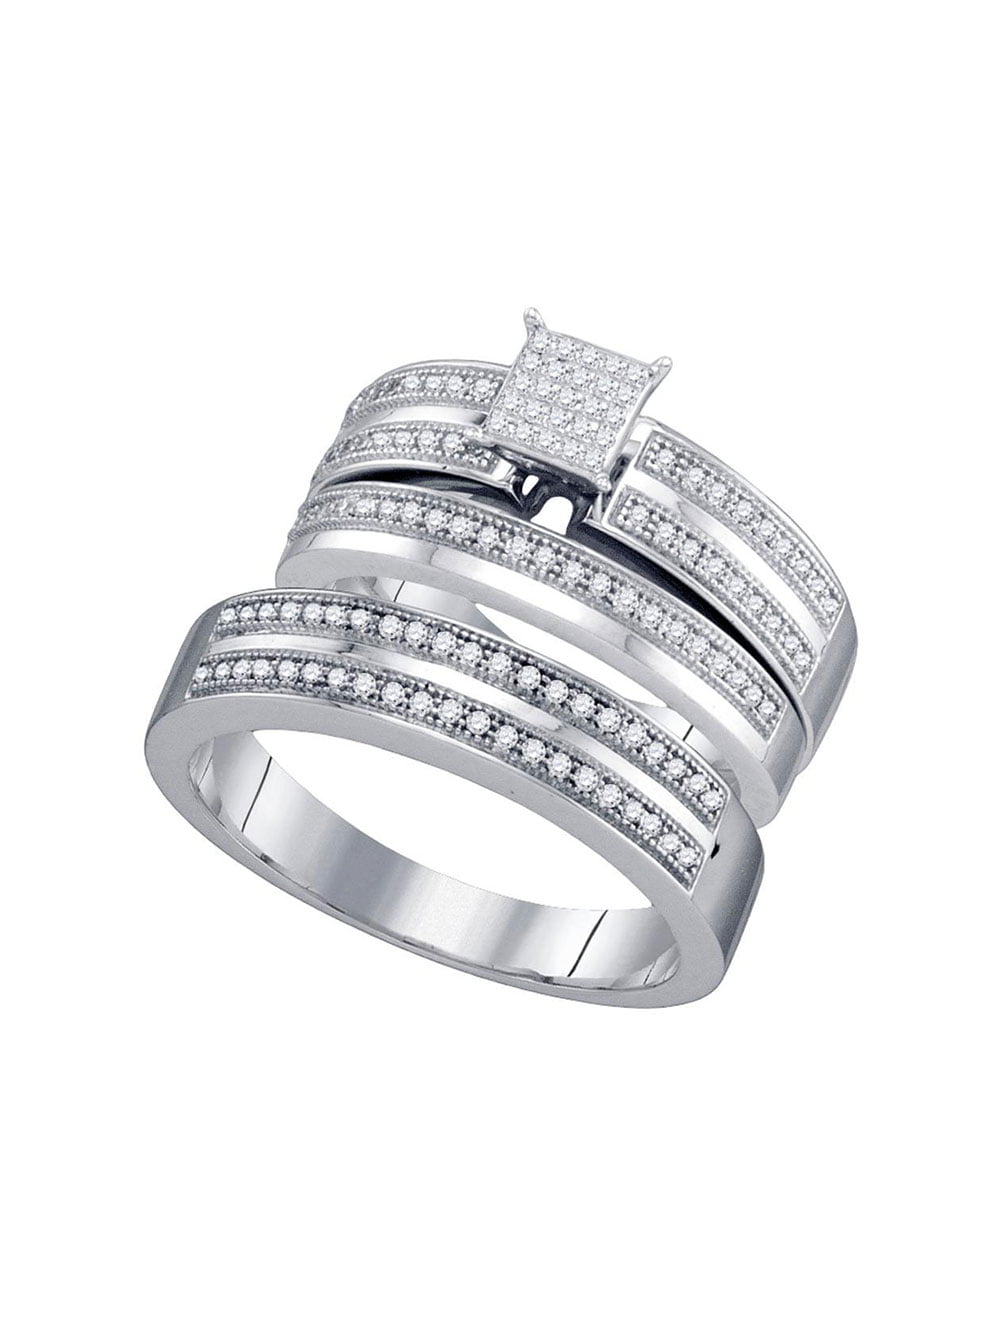 Details about   New Lovely Style Pure Solid Sterling Silver 0.5CT Diamond Ring For Women Wedding 